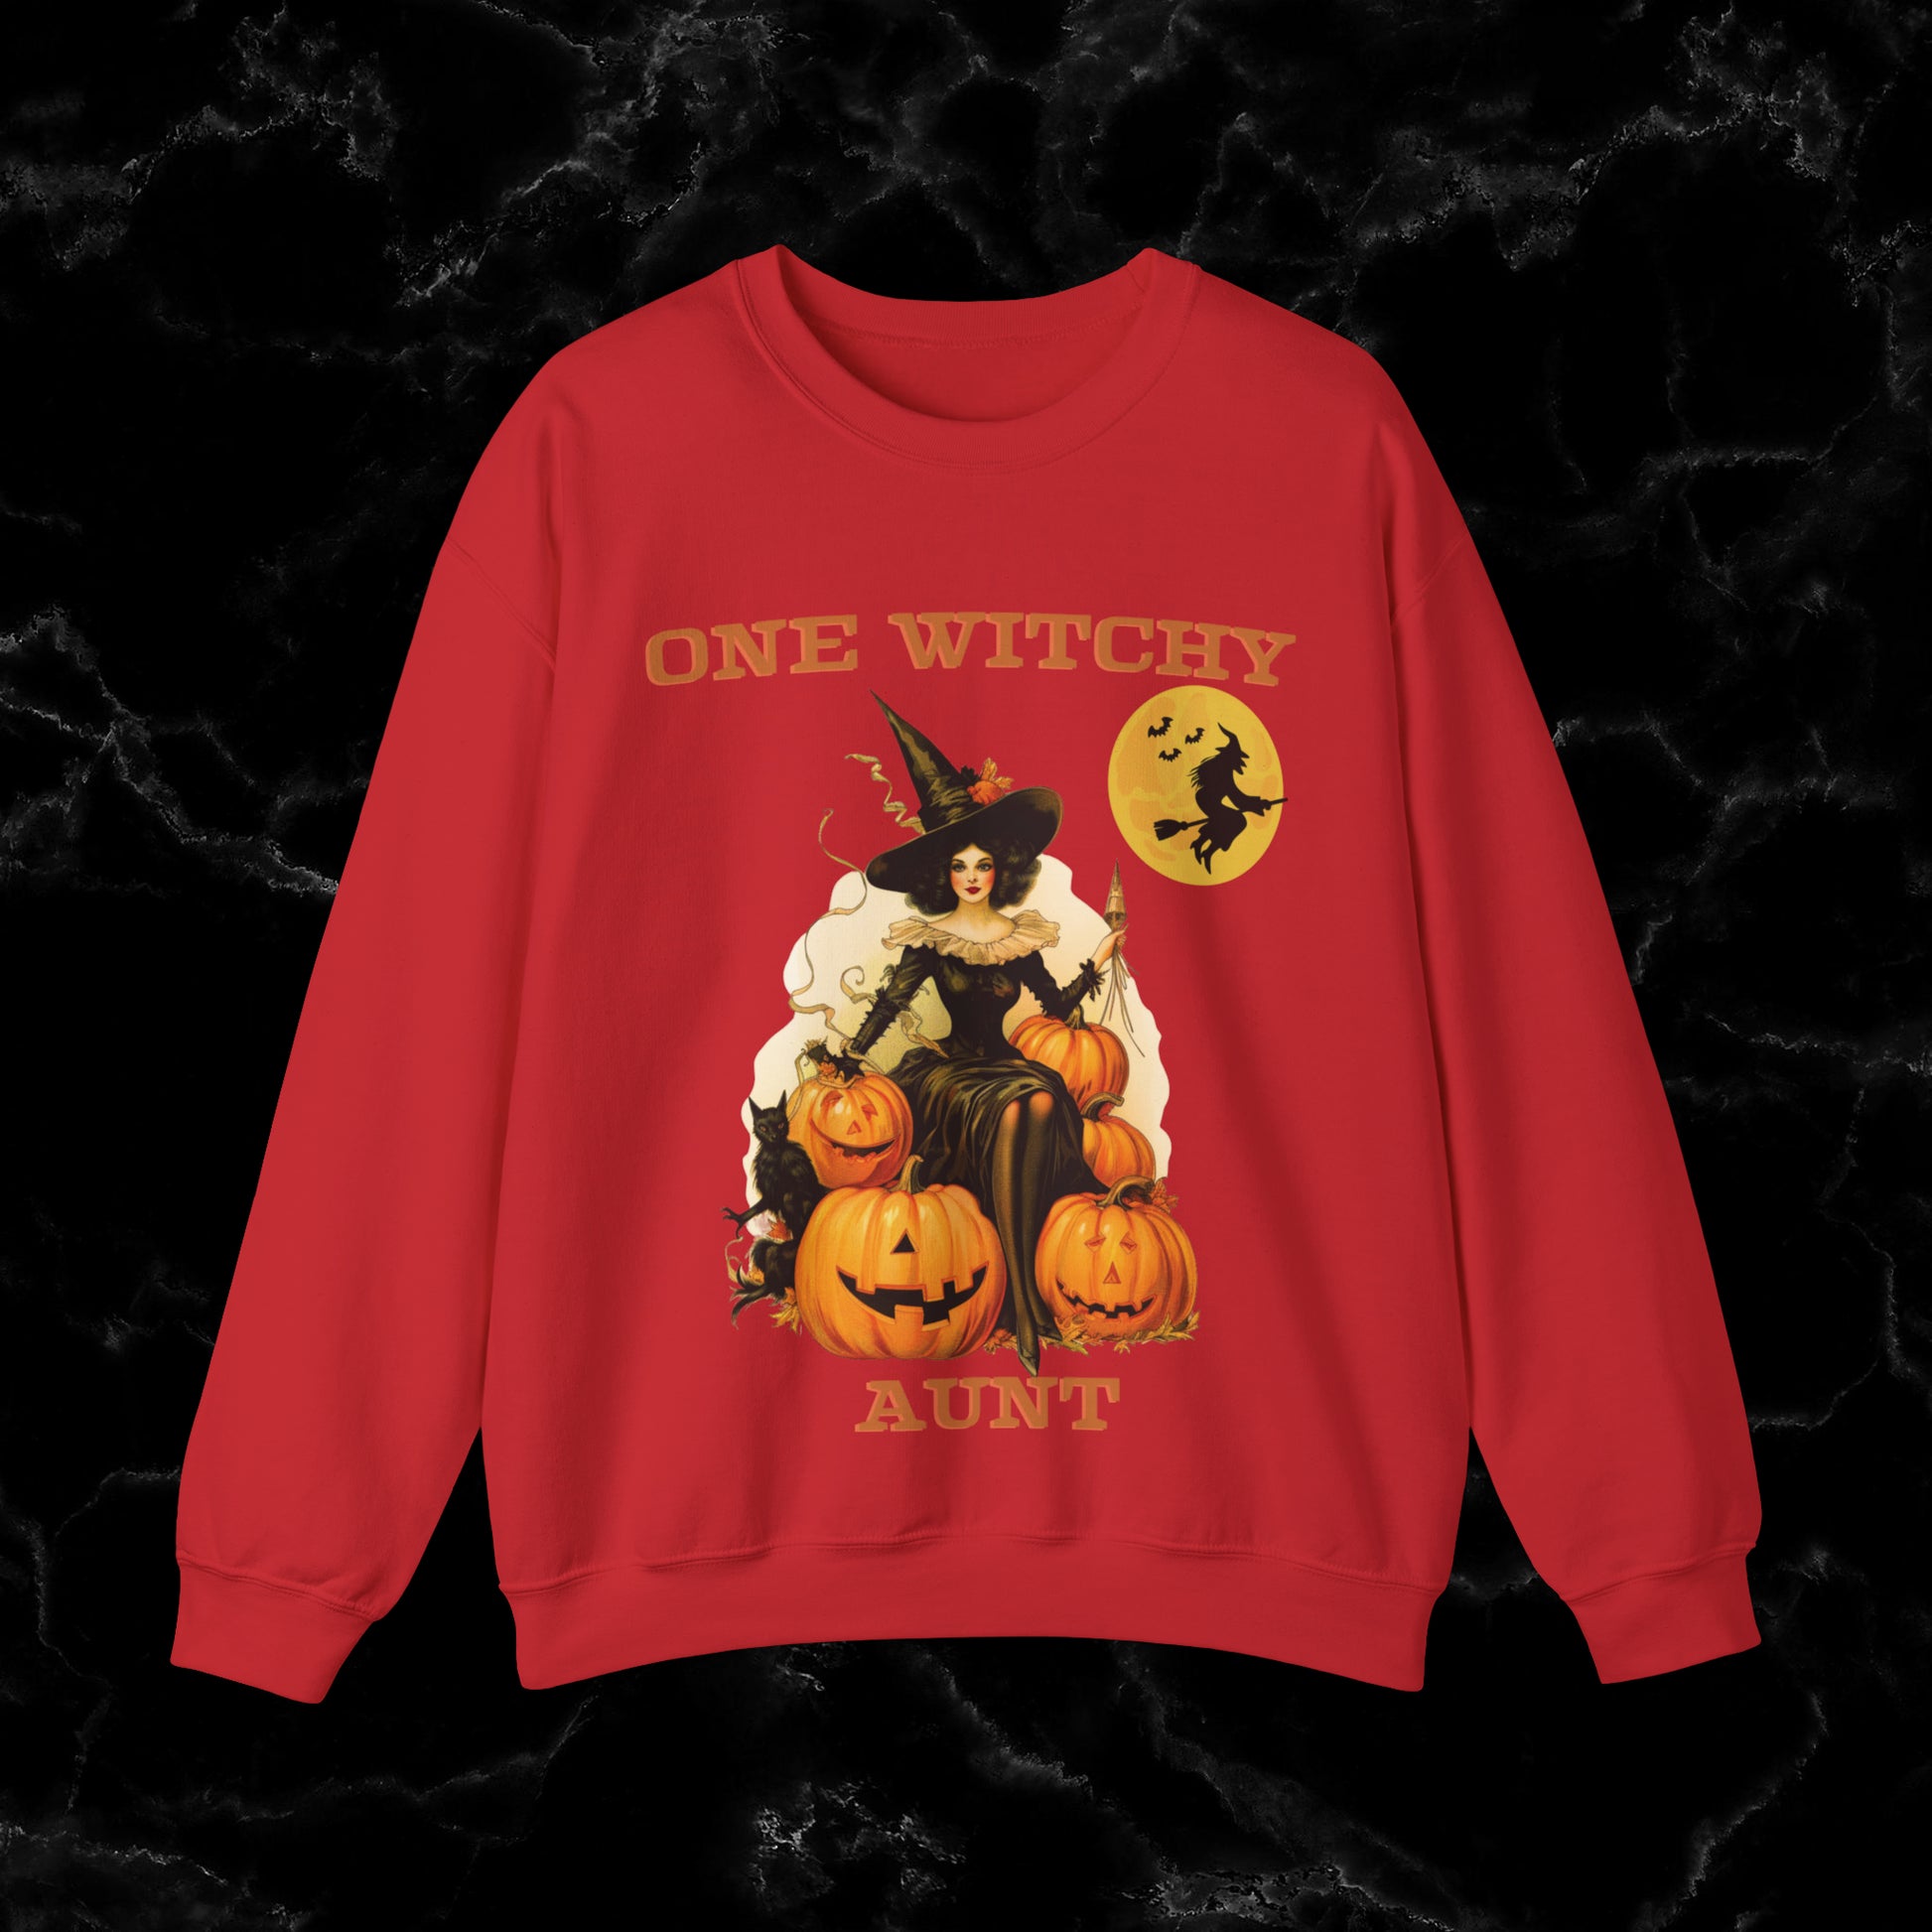 One Witchy Aunt Halloween Sweatshirt - Cool Aunt Shirt, Feral Aunt Sweatshirt, Perfect Gifts for Aunts Sweatshirt S Red 